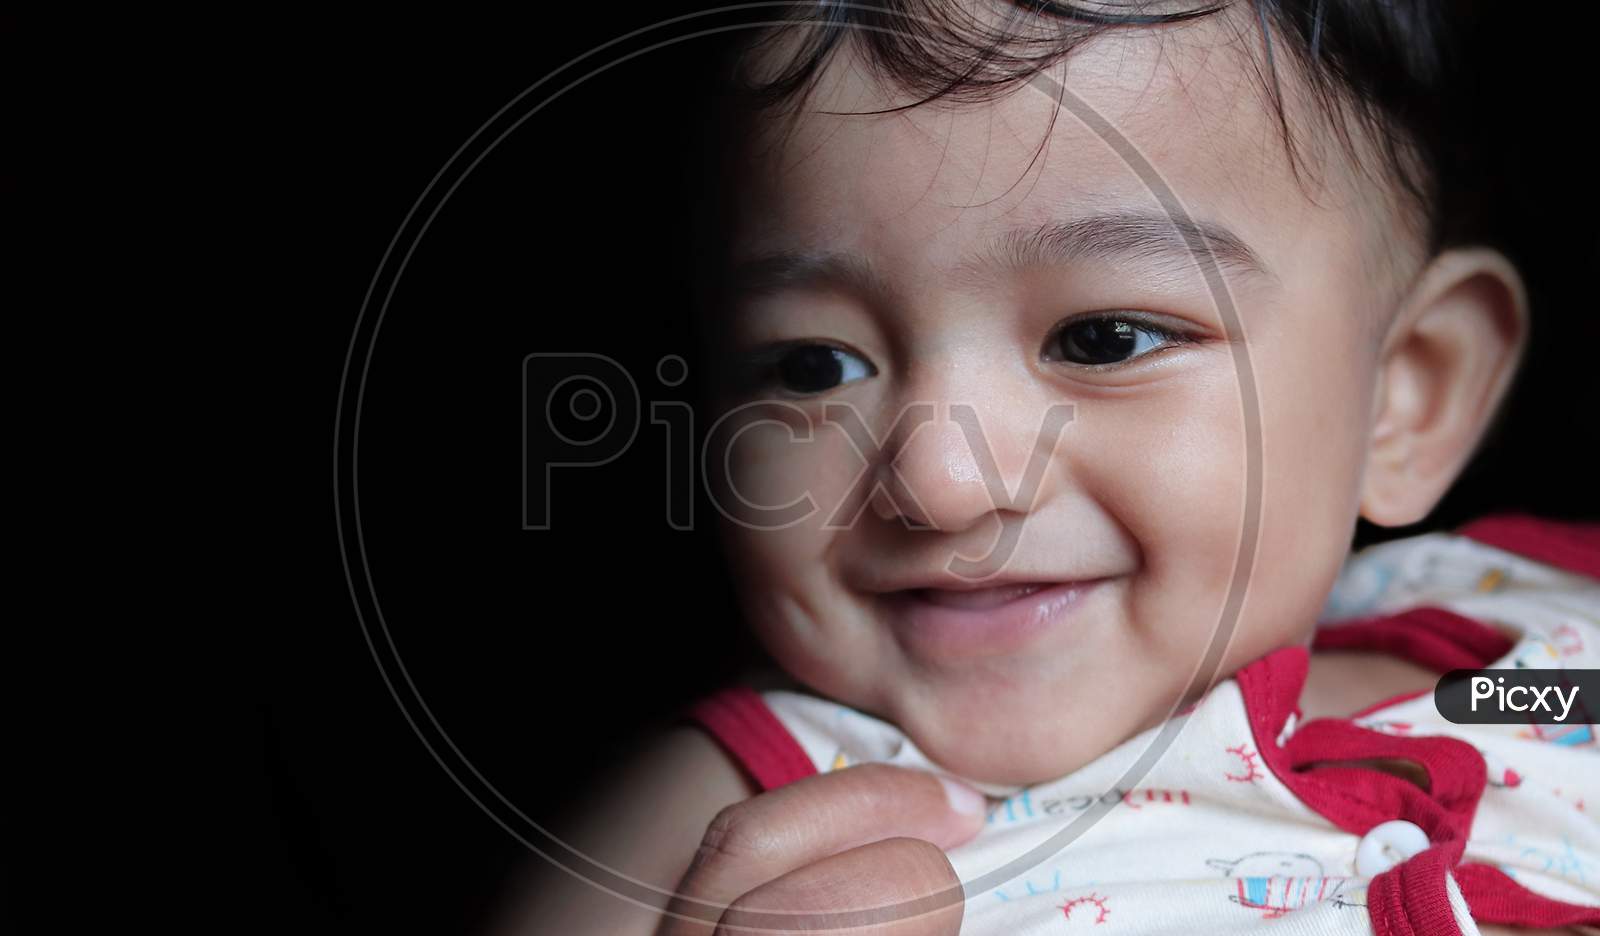 A Head Shot Portrait Of An Adorable Indian Baby Looking At Downwards And Left With Selective Focus On Front Eye With Copy Space In Black Background